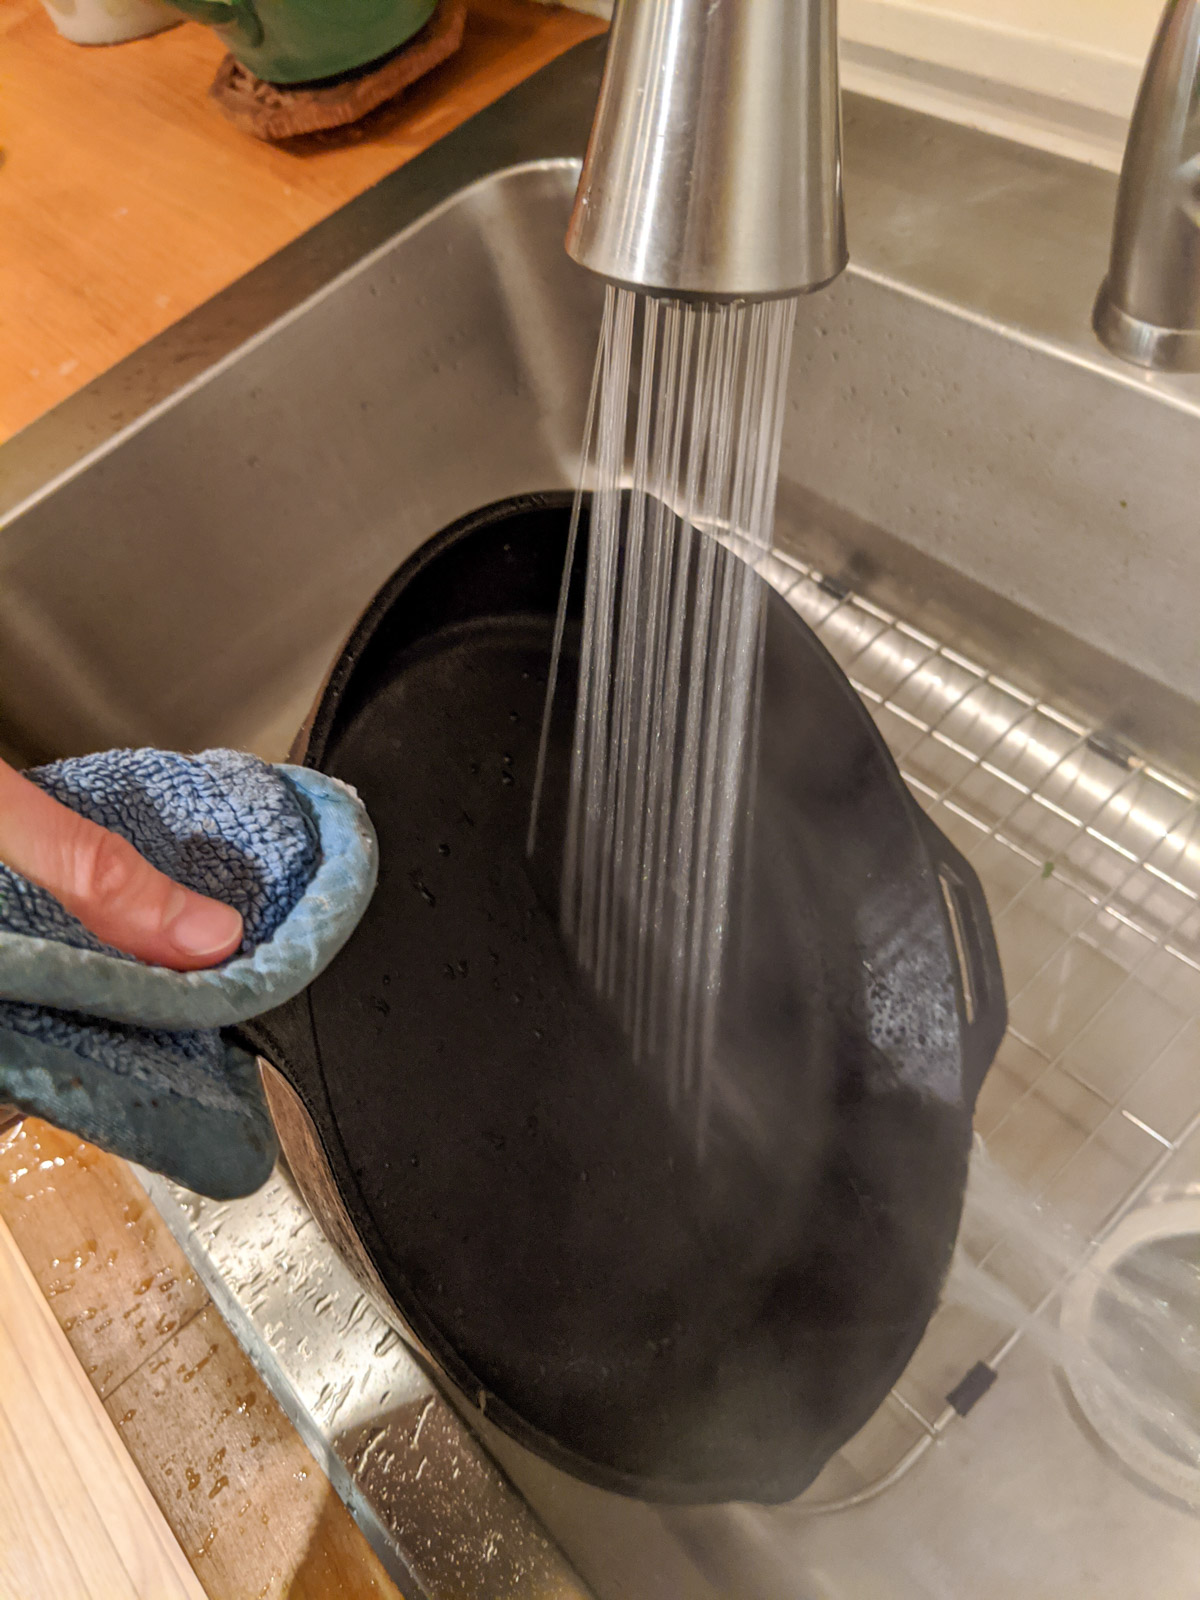 Spraying a cast iron skillet with water over the kitchen sink.